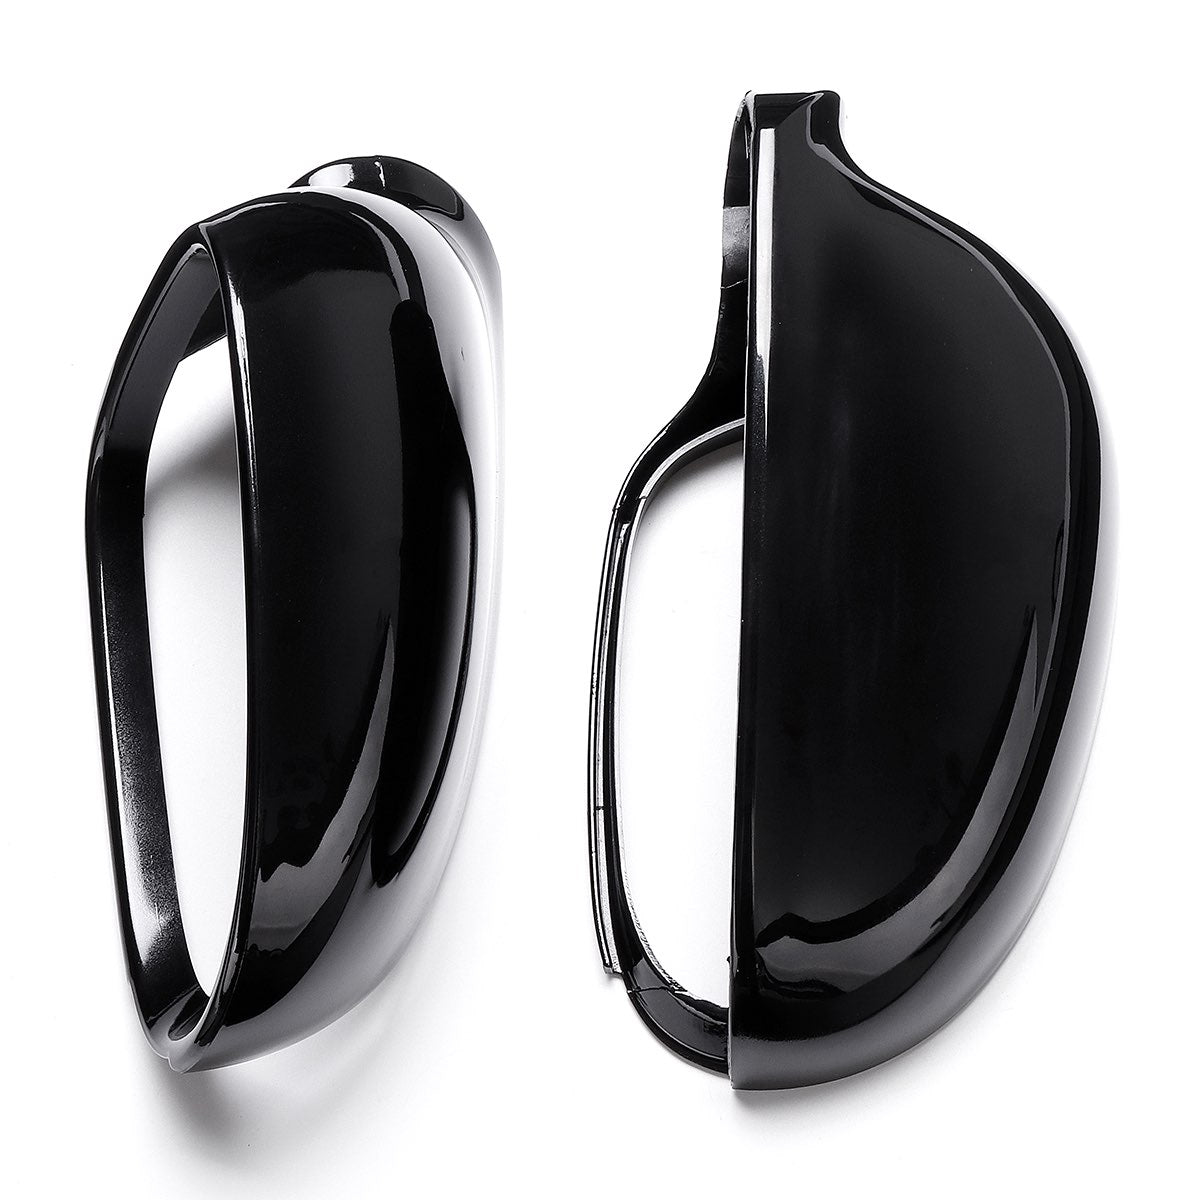 Left Black Rearview Wing Mirror Cover Casing Suit For Volkswagen Suit For VW Jetta Golf MK5